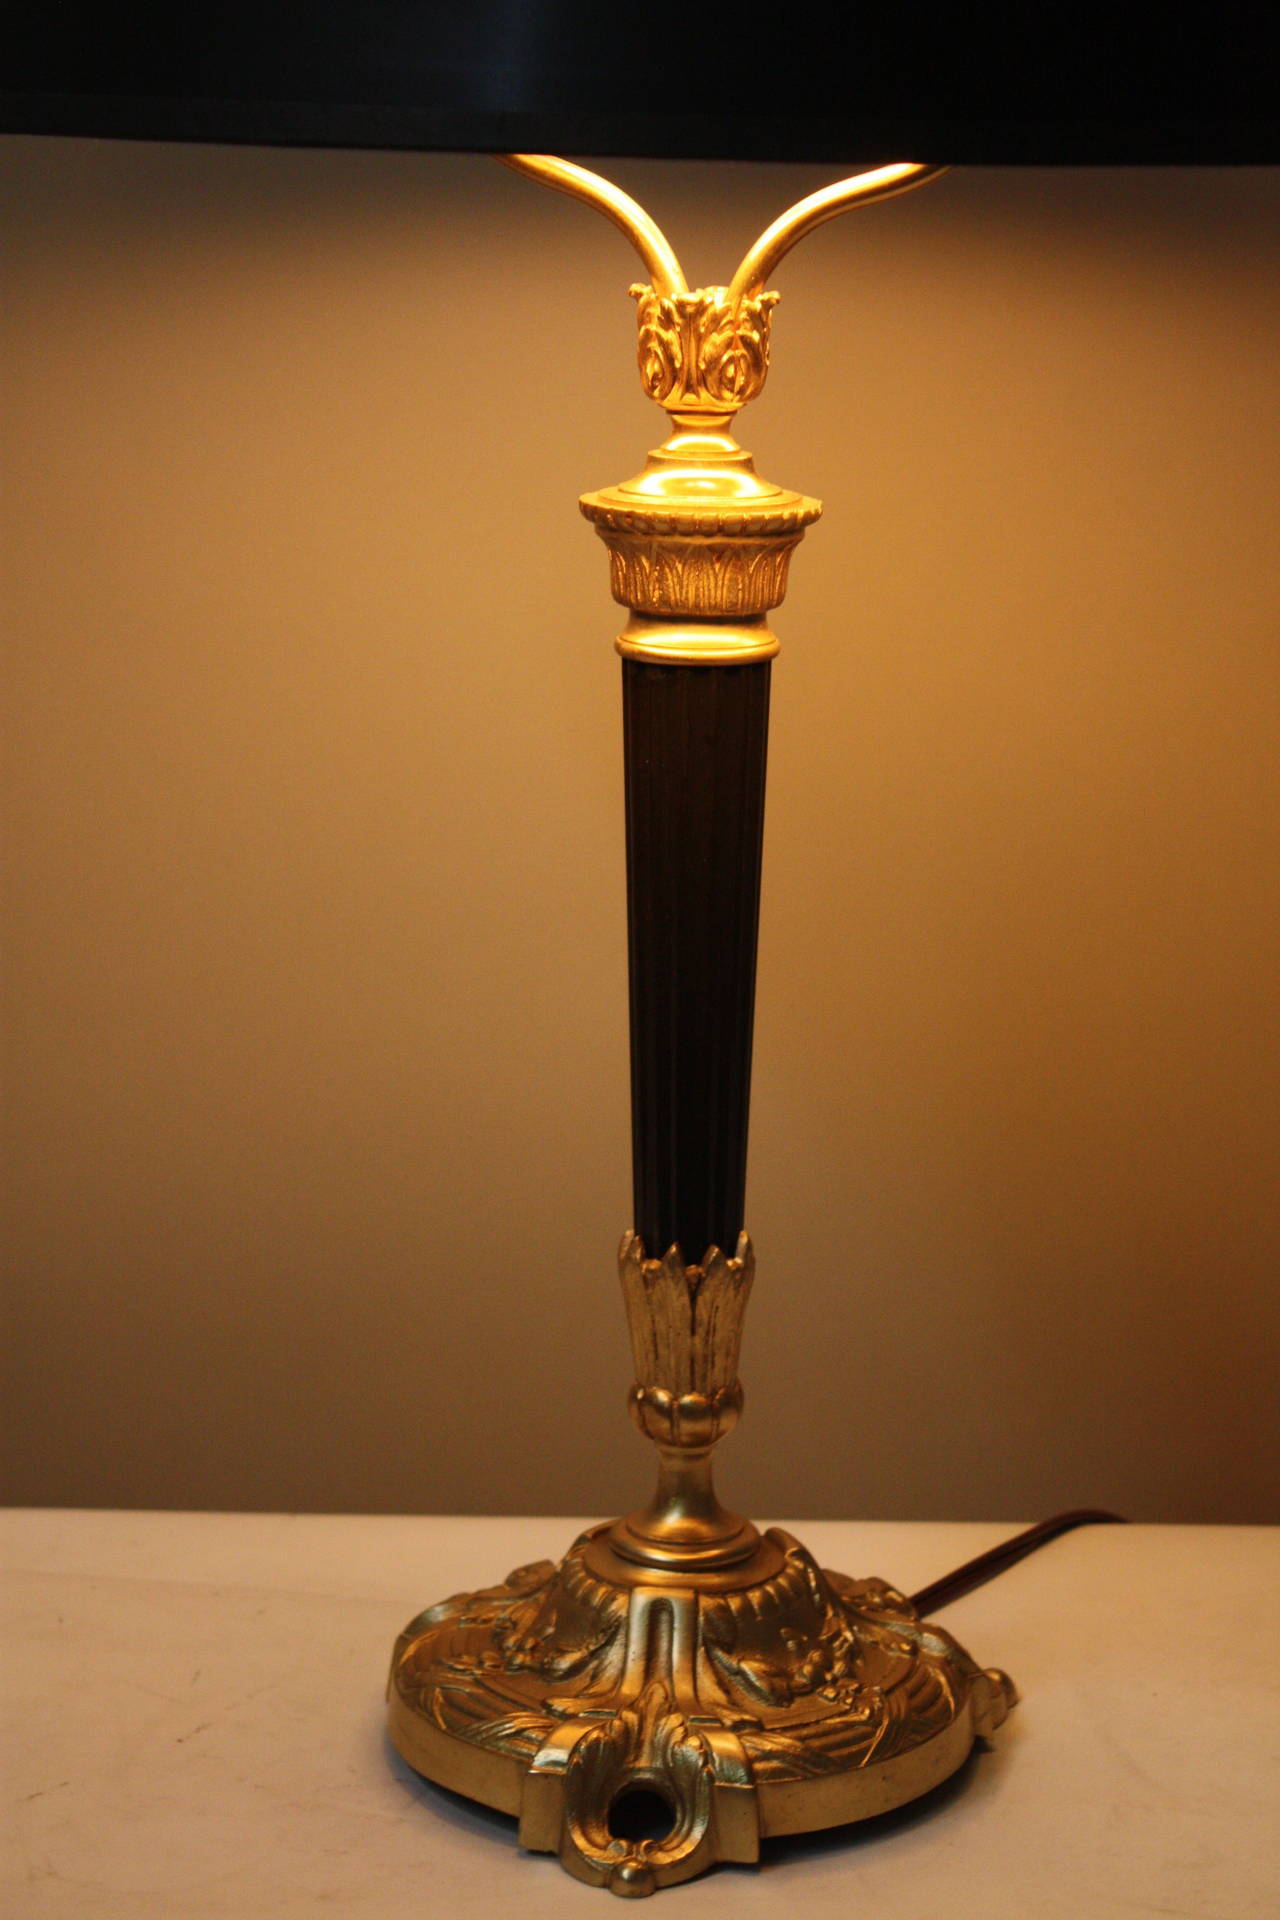 This fantastic French table lamp from 20th century. Made of classic black lacquer and bronze with ornate details.